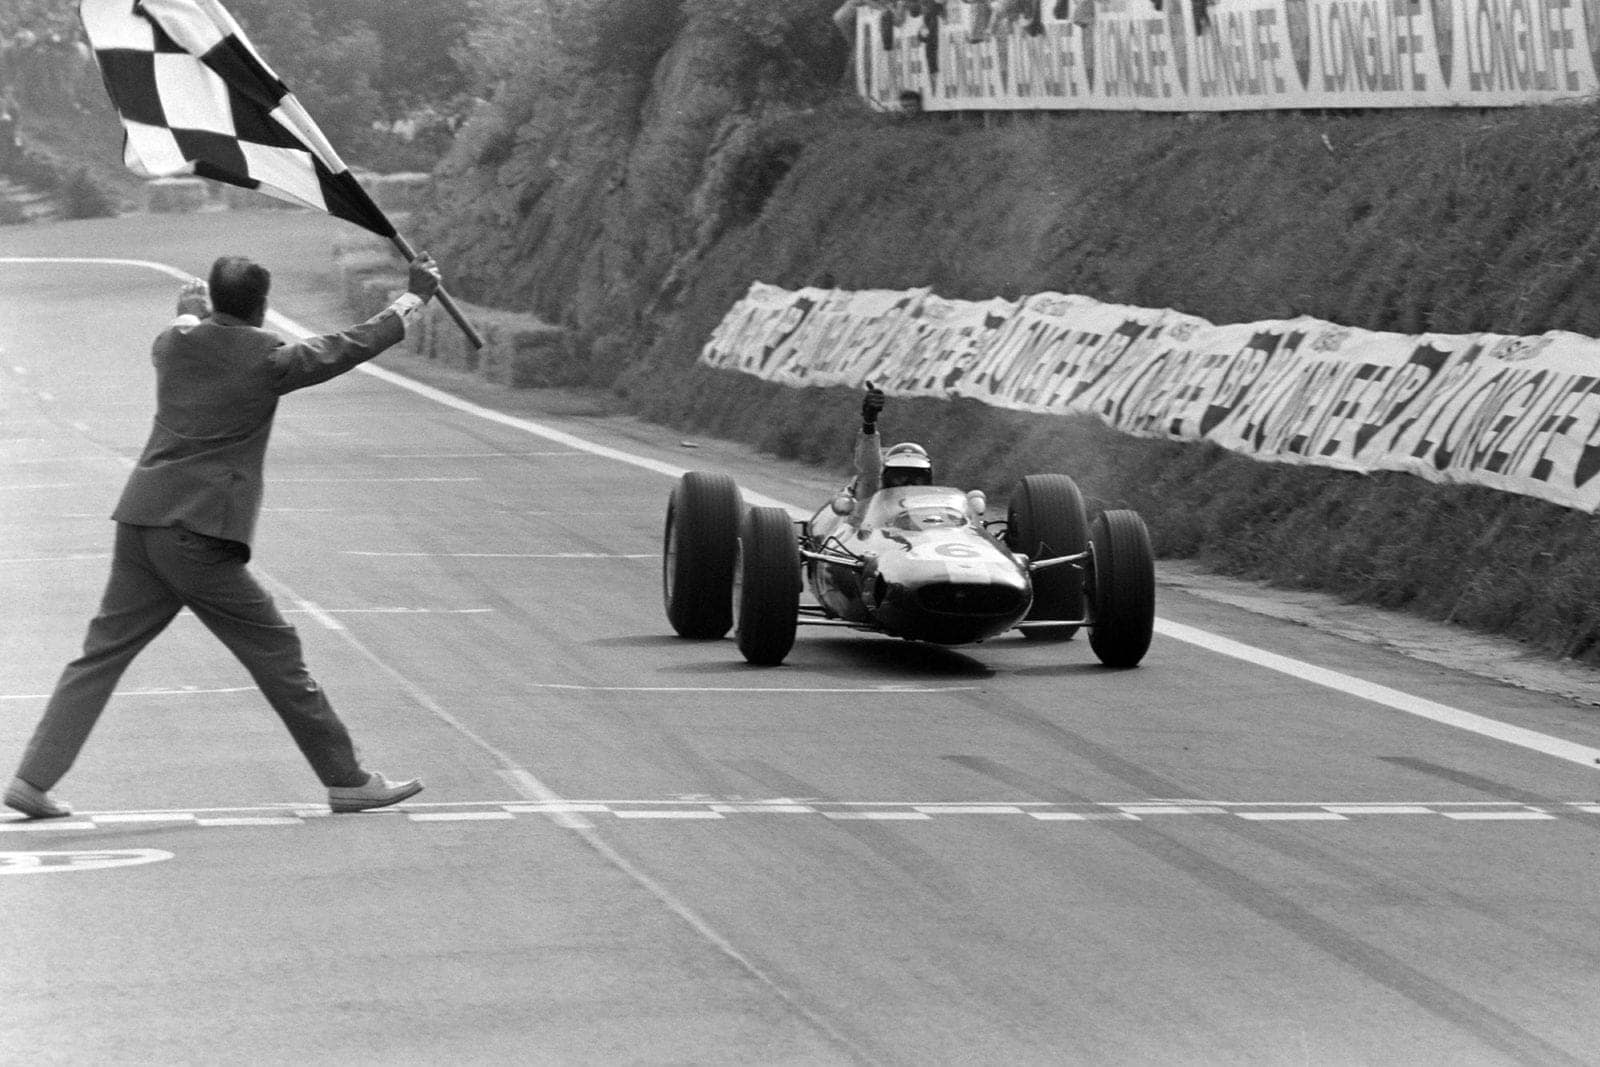 Jim Clark, Lotus 25 Climax, gives a thumbs up as he takes the chequered flag.